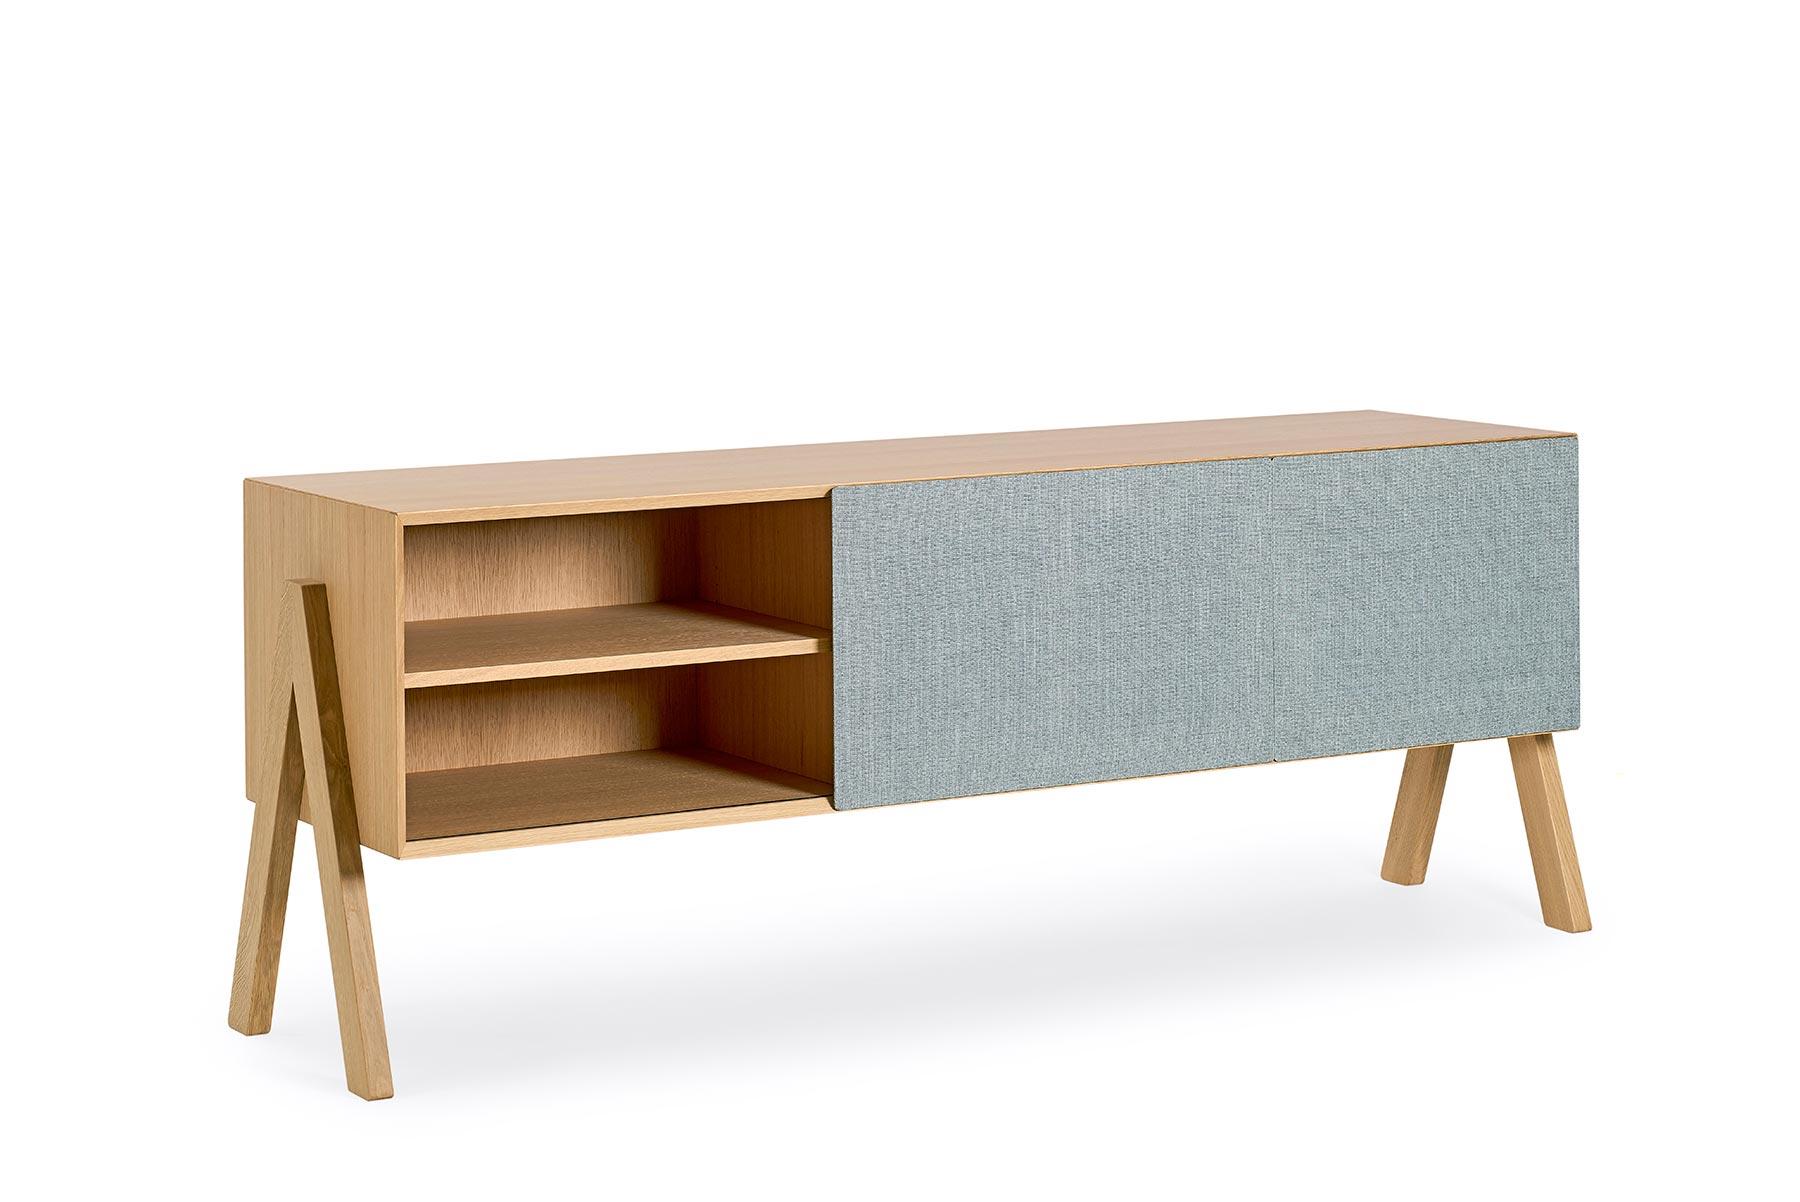 Designed by Friis & Moltke in 2017, this Minimalist’s credenza features exterior mounted v- legs with a cloth cabinet door that slides from one bay to the next. Crafted in solid wood, this credenza is hand built at GETAMA’s factory in Gedsted,